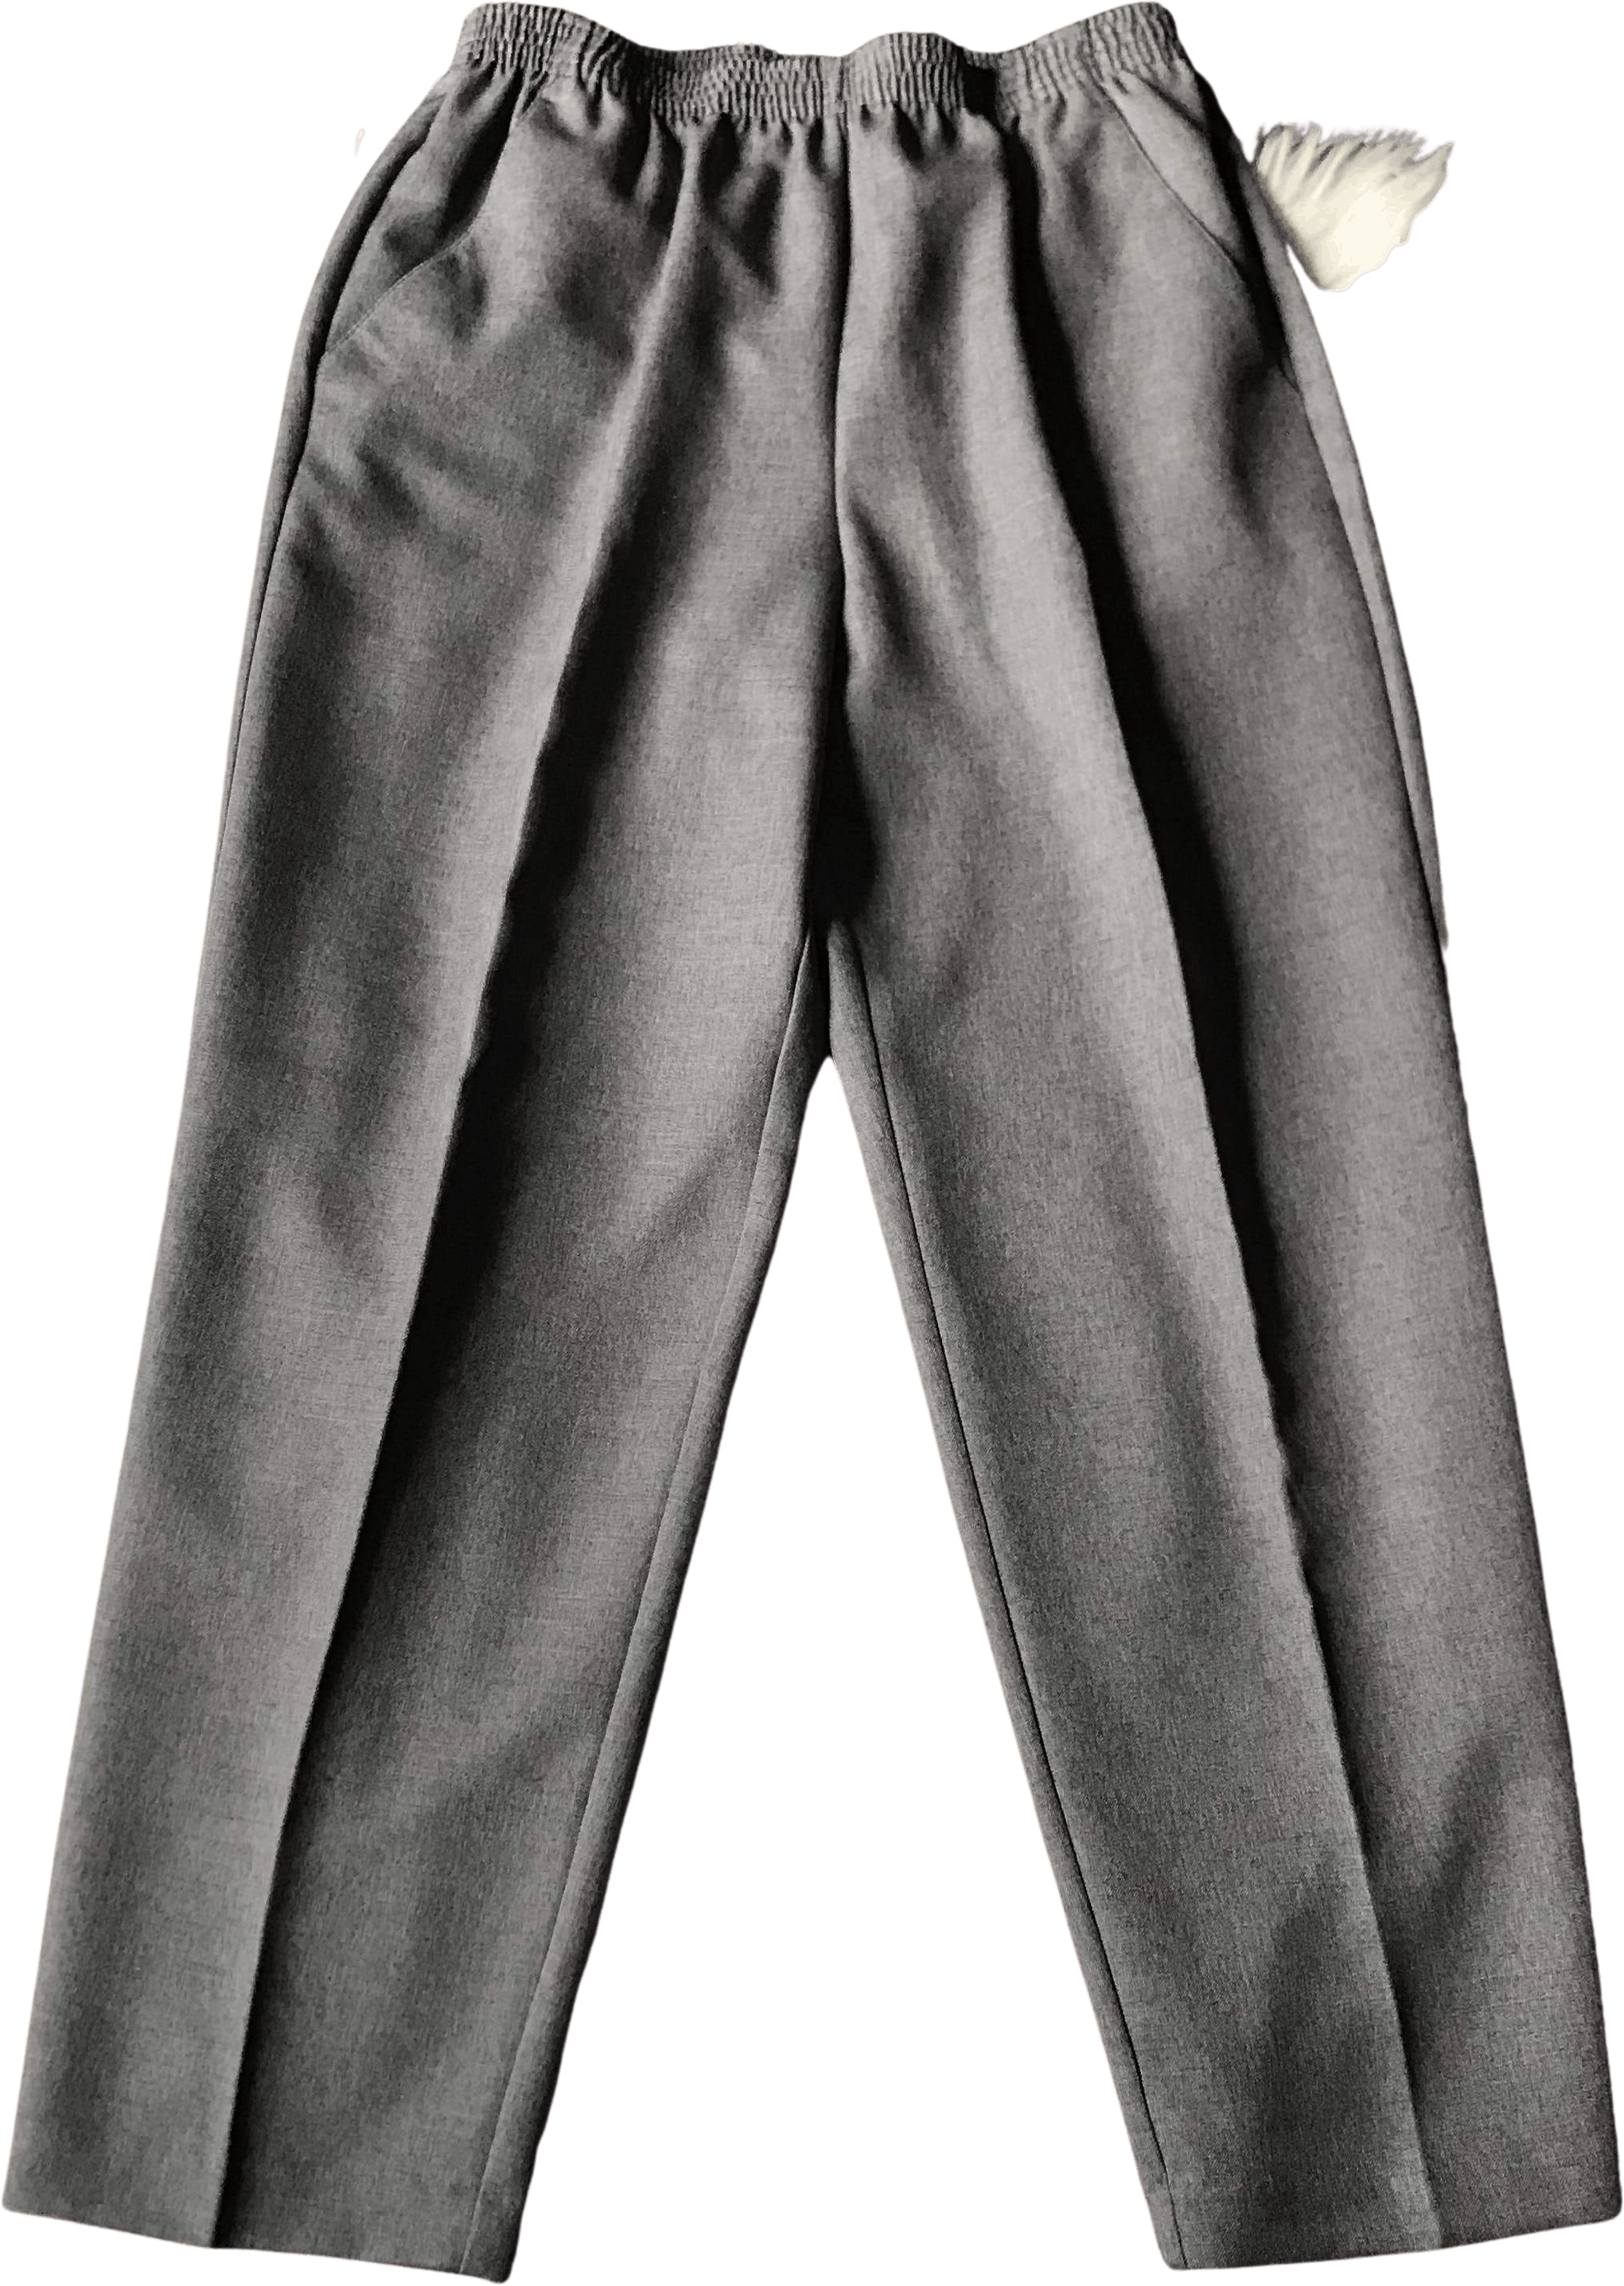 High Waisted Grey Pants by Briggs New York – Thrilling